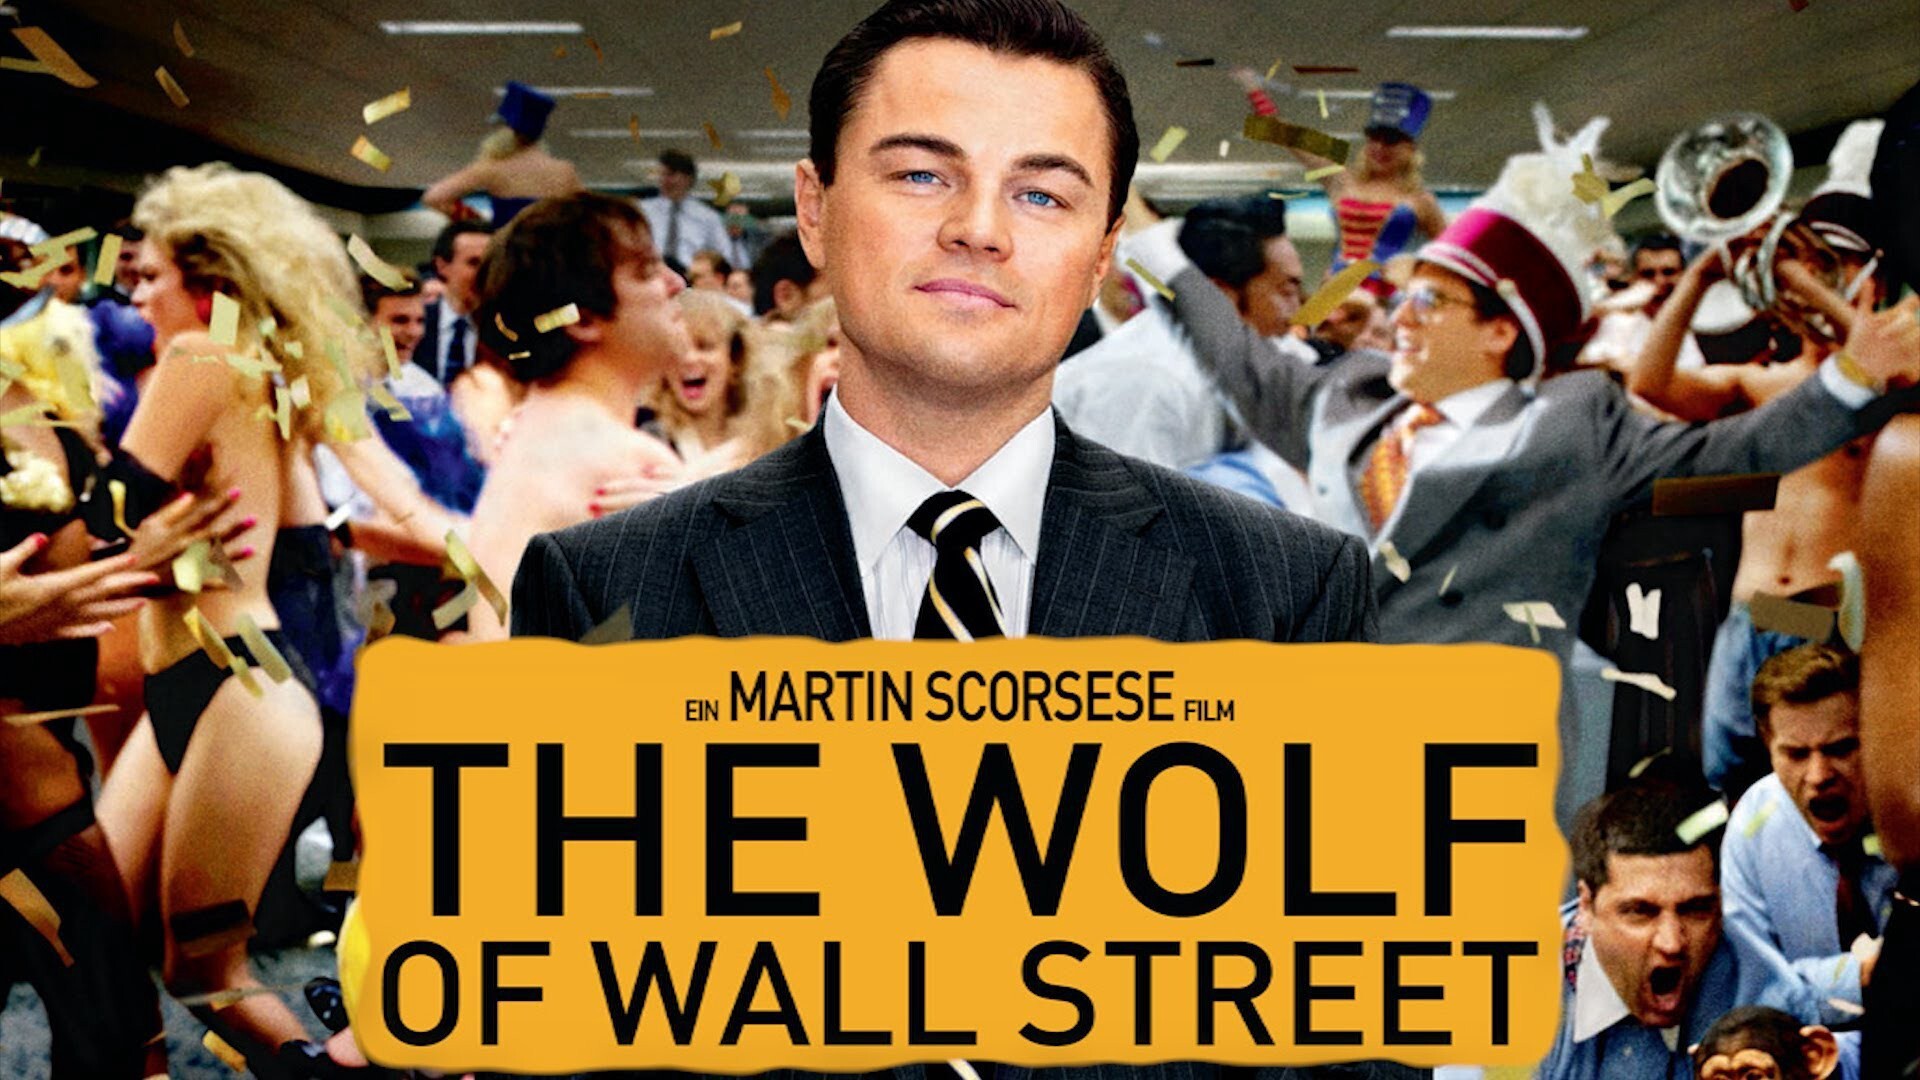 wall of the wolf street